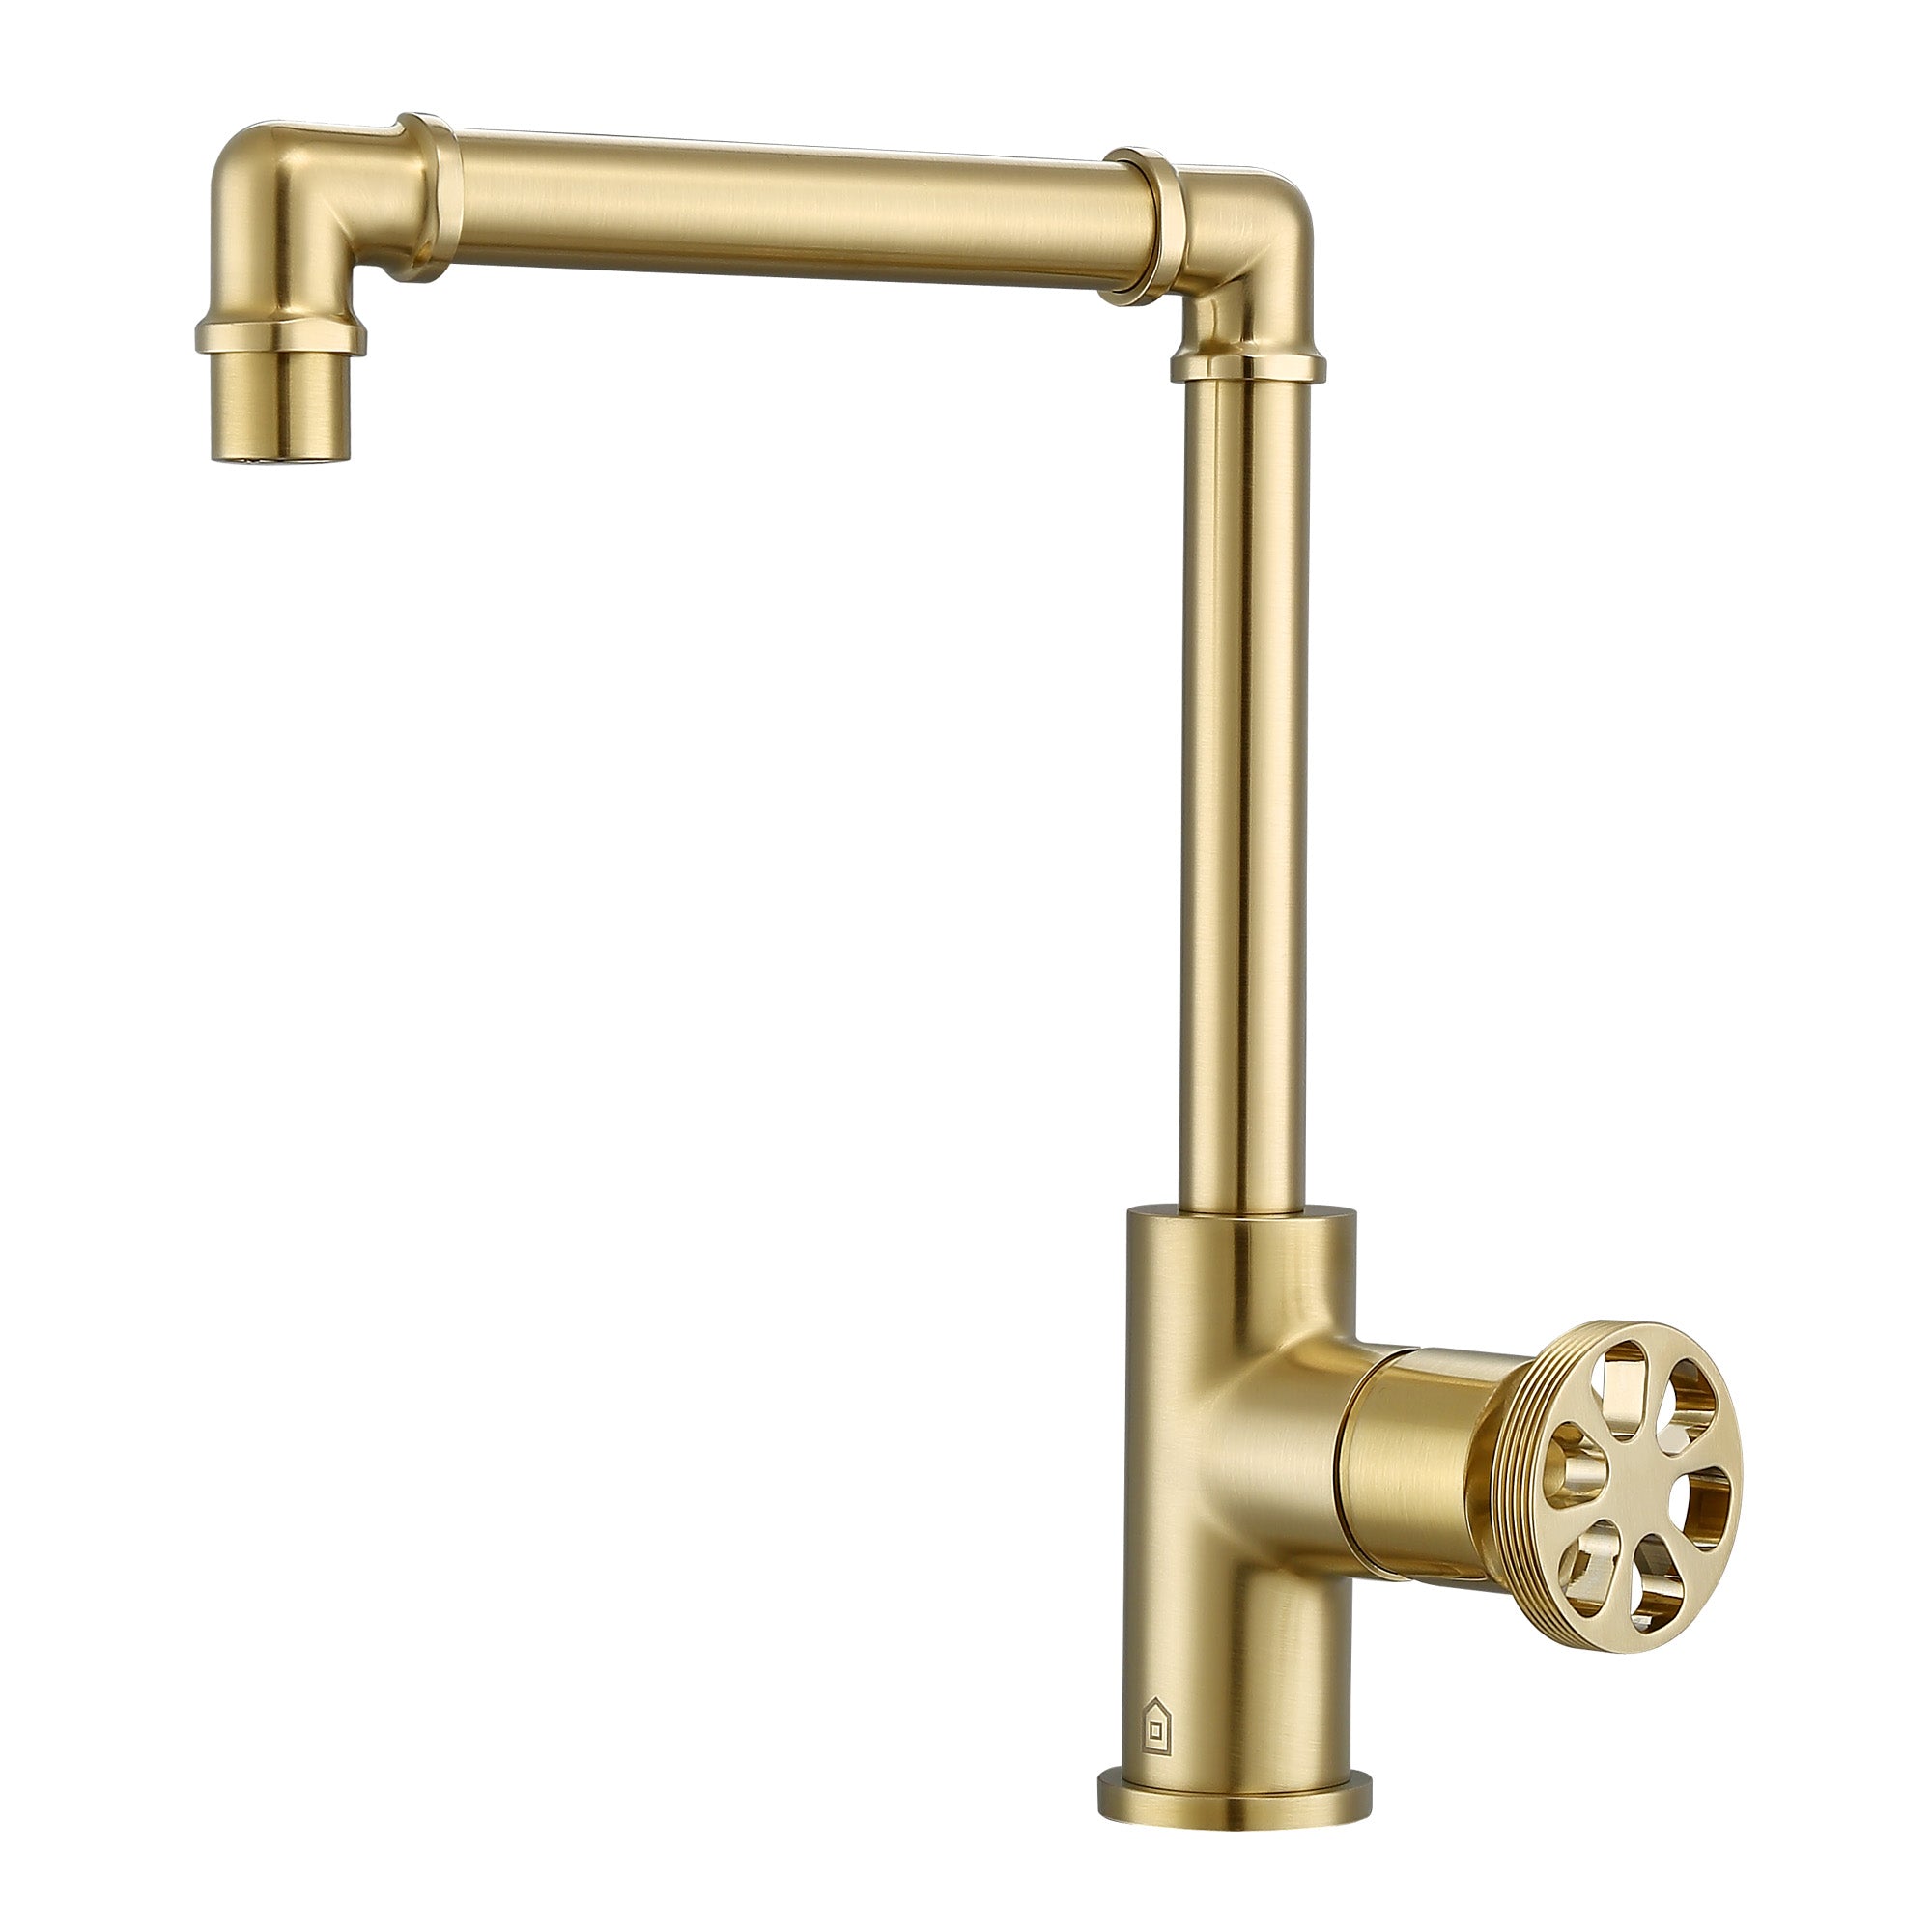 Ancona Urban Round Wheel Handle 1-Hole Bathroom Faucet in Brushed Champagne Gold